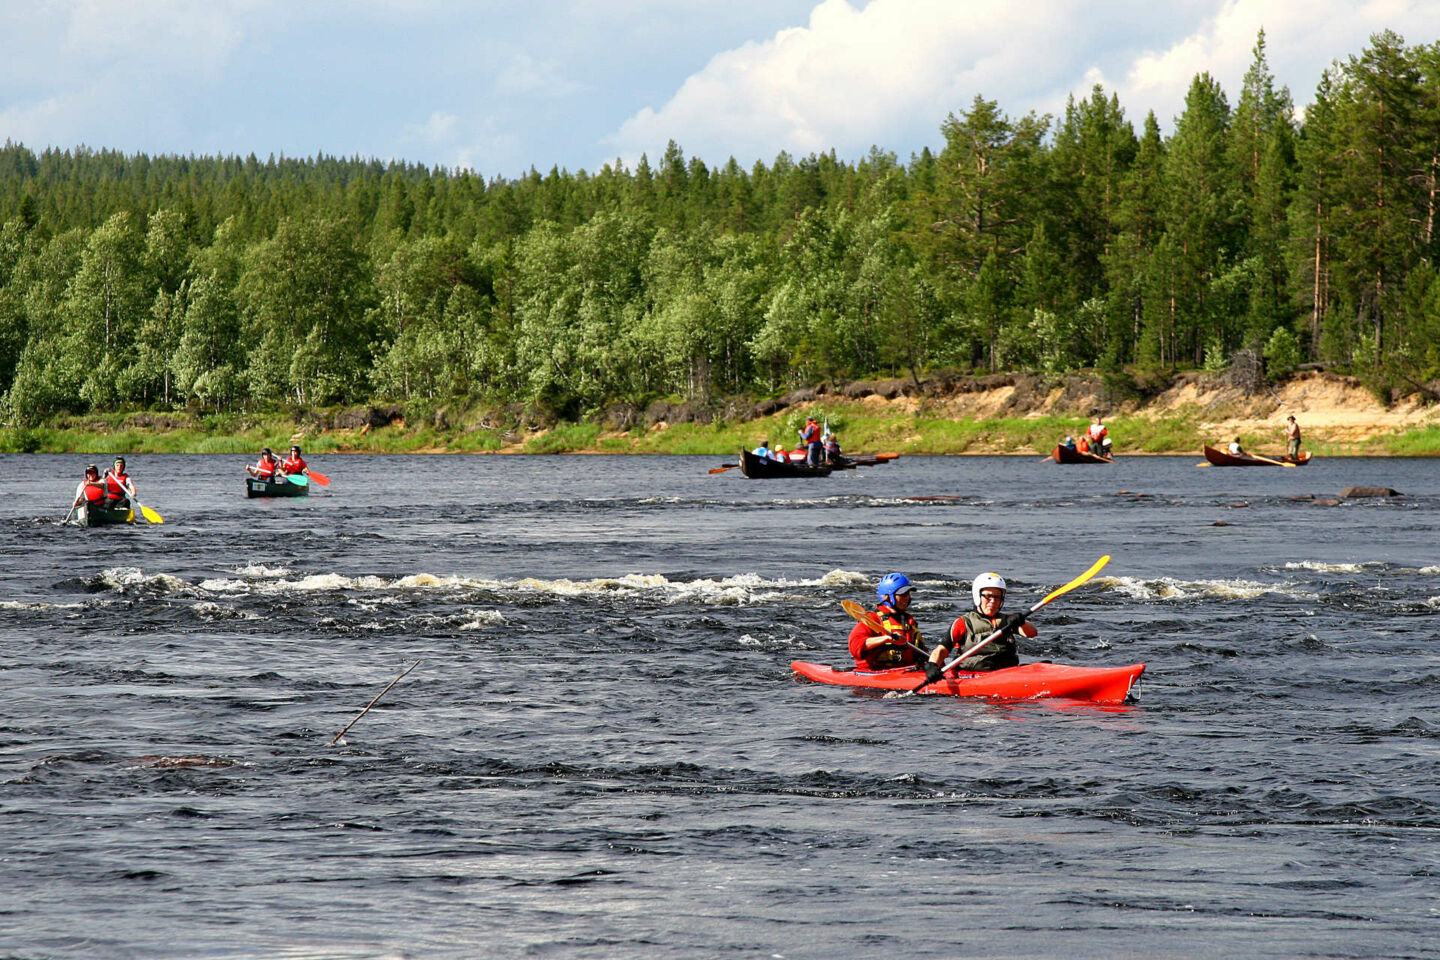 Canoes, kayaks and rafts on the rivers and rapids of Muonio, a Finnish Lapland filming location